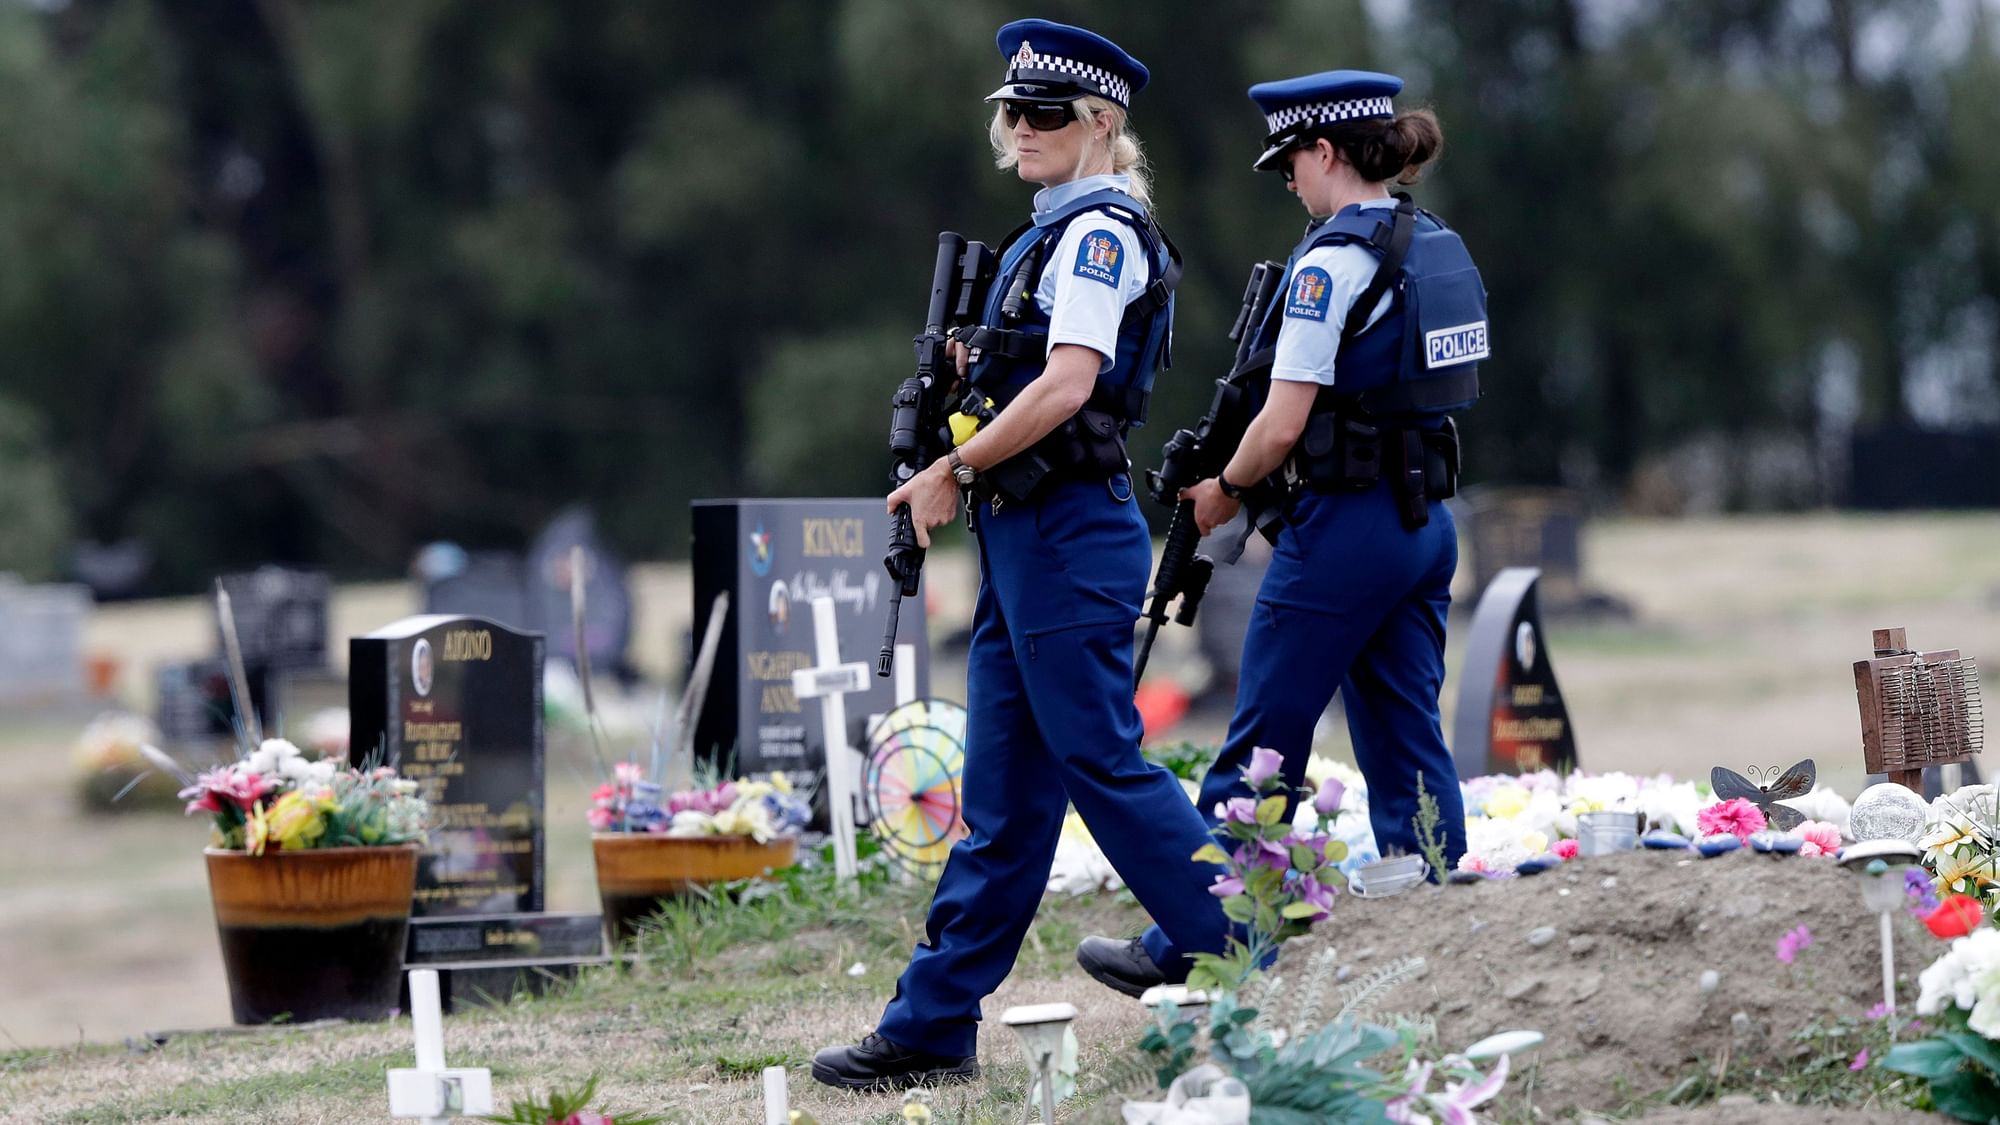 Police personnel stand guard at a memorial site for the victims of Christchurch terror attack.